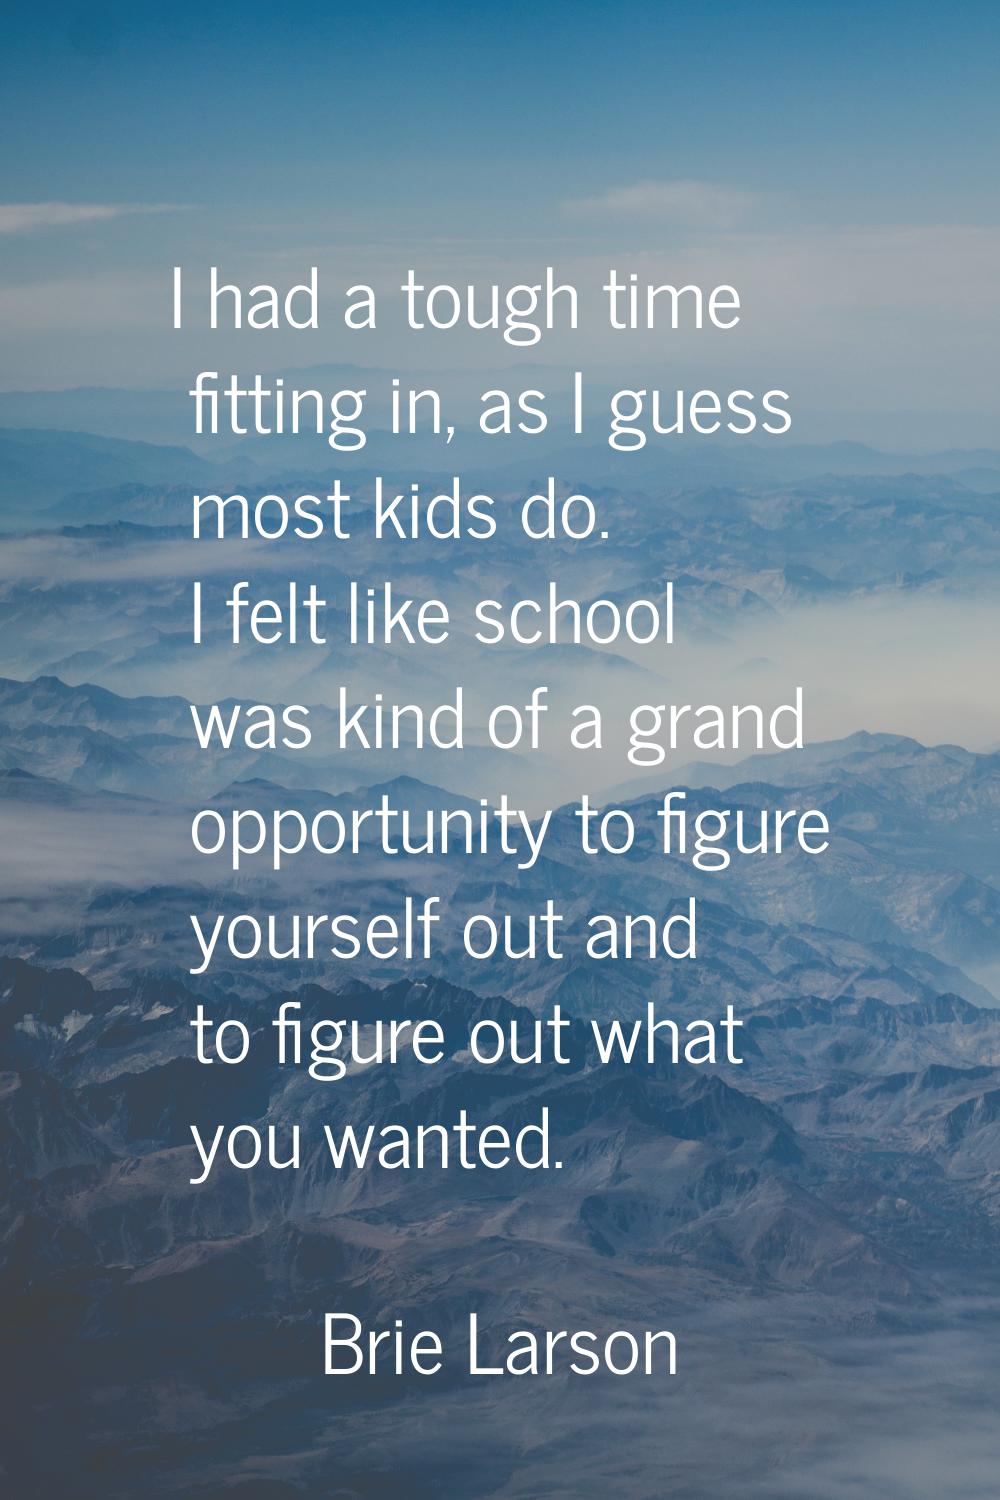 I had a tough time fitting in, as I guess most kids do. I felt like school was kind of a grand oppo